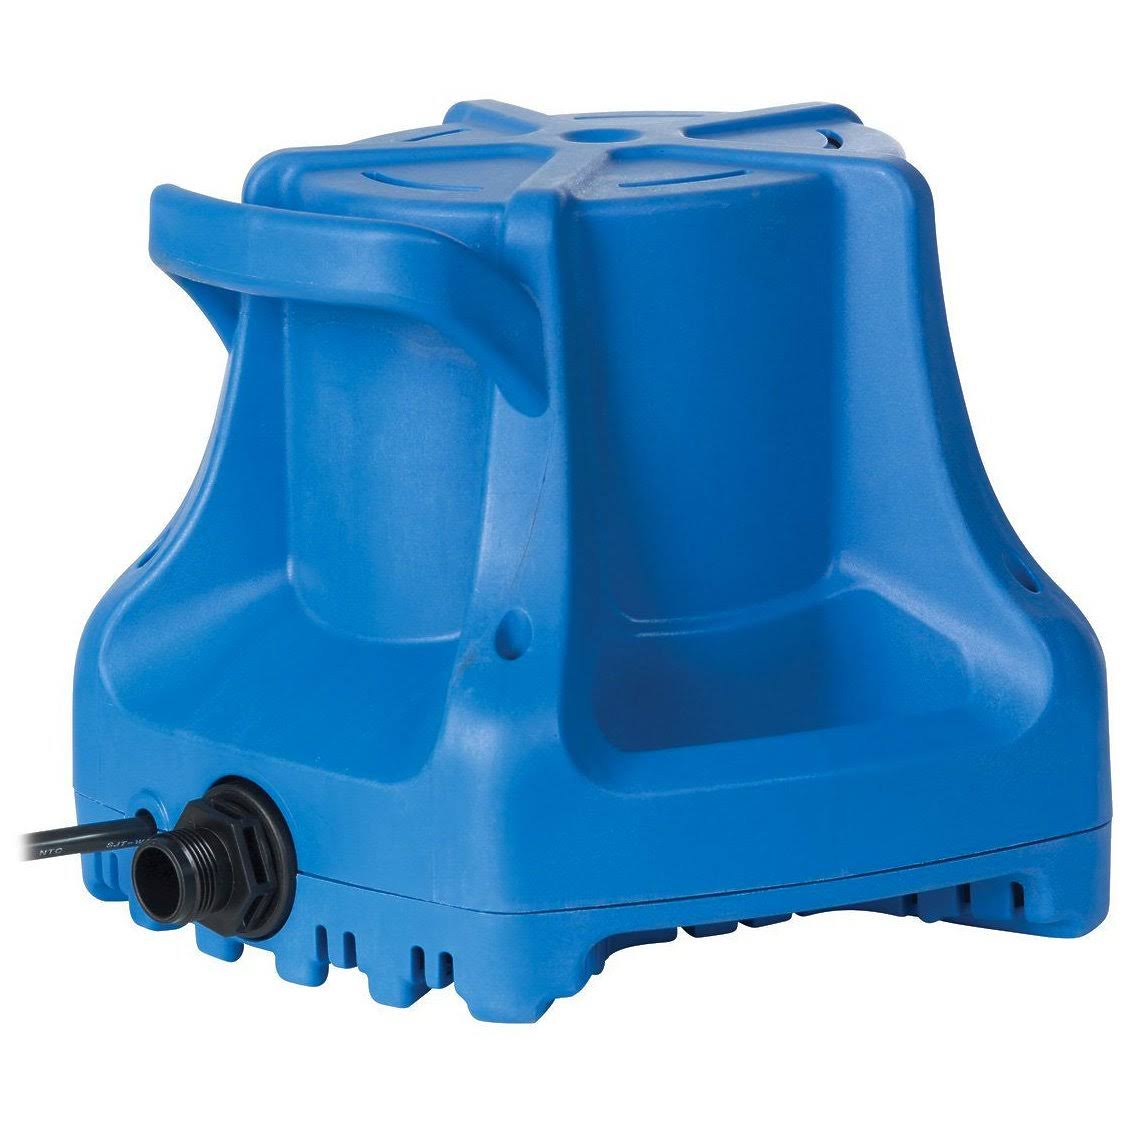 Super Pro 1745 GPH Submersible Automatic Swimming Pool Cover Pump